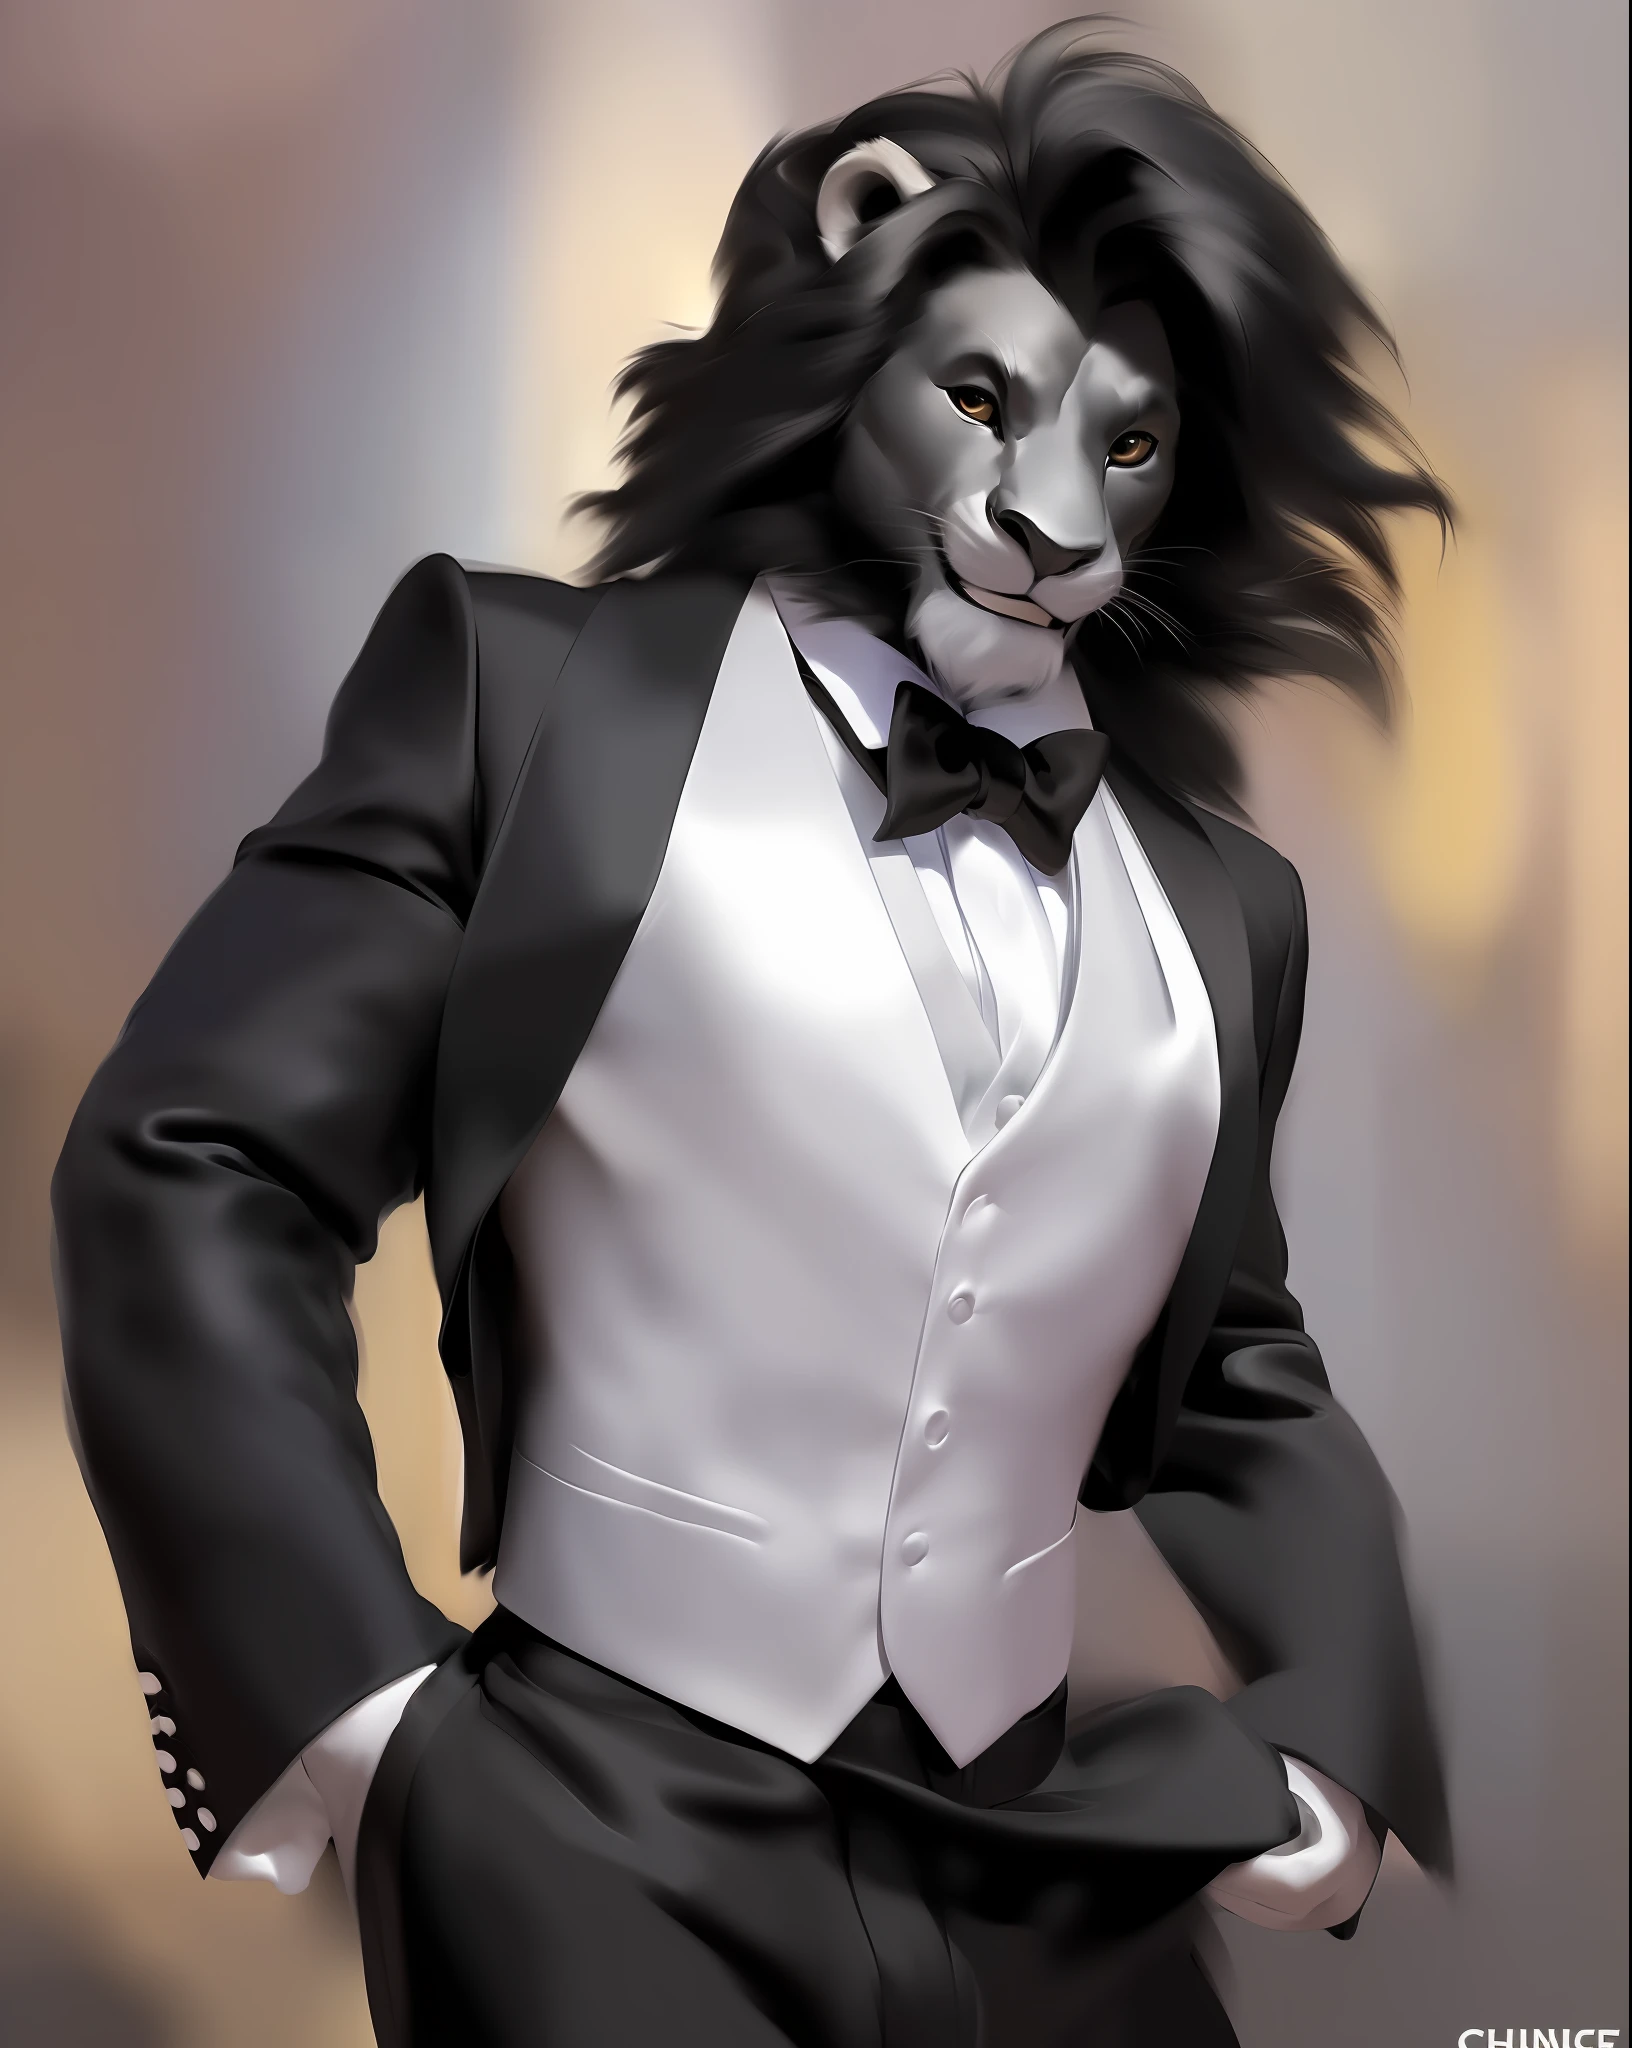 ((Solo)), (anthropomorphic: 0.9) dark gray lion, (black mane: 0.8), short, front fringe, light gray belly, (adolescent: 0.7), (muscular: 0.8), (tuxedo: 0.9) smiling, happy facial expression (from chunie).